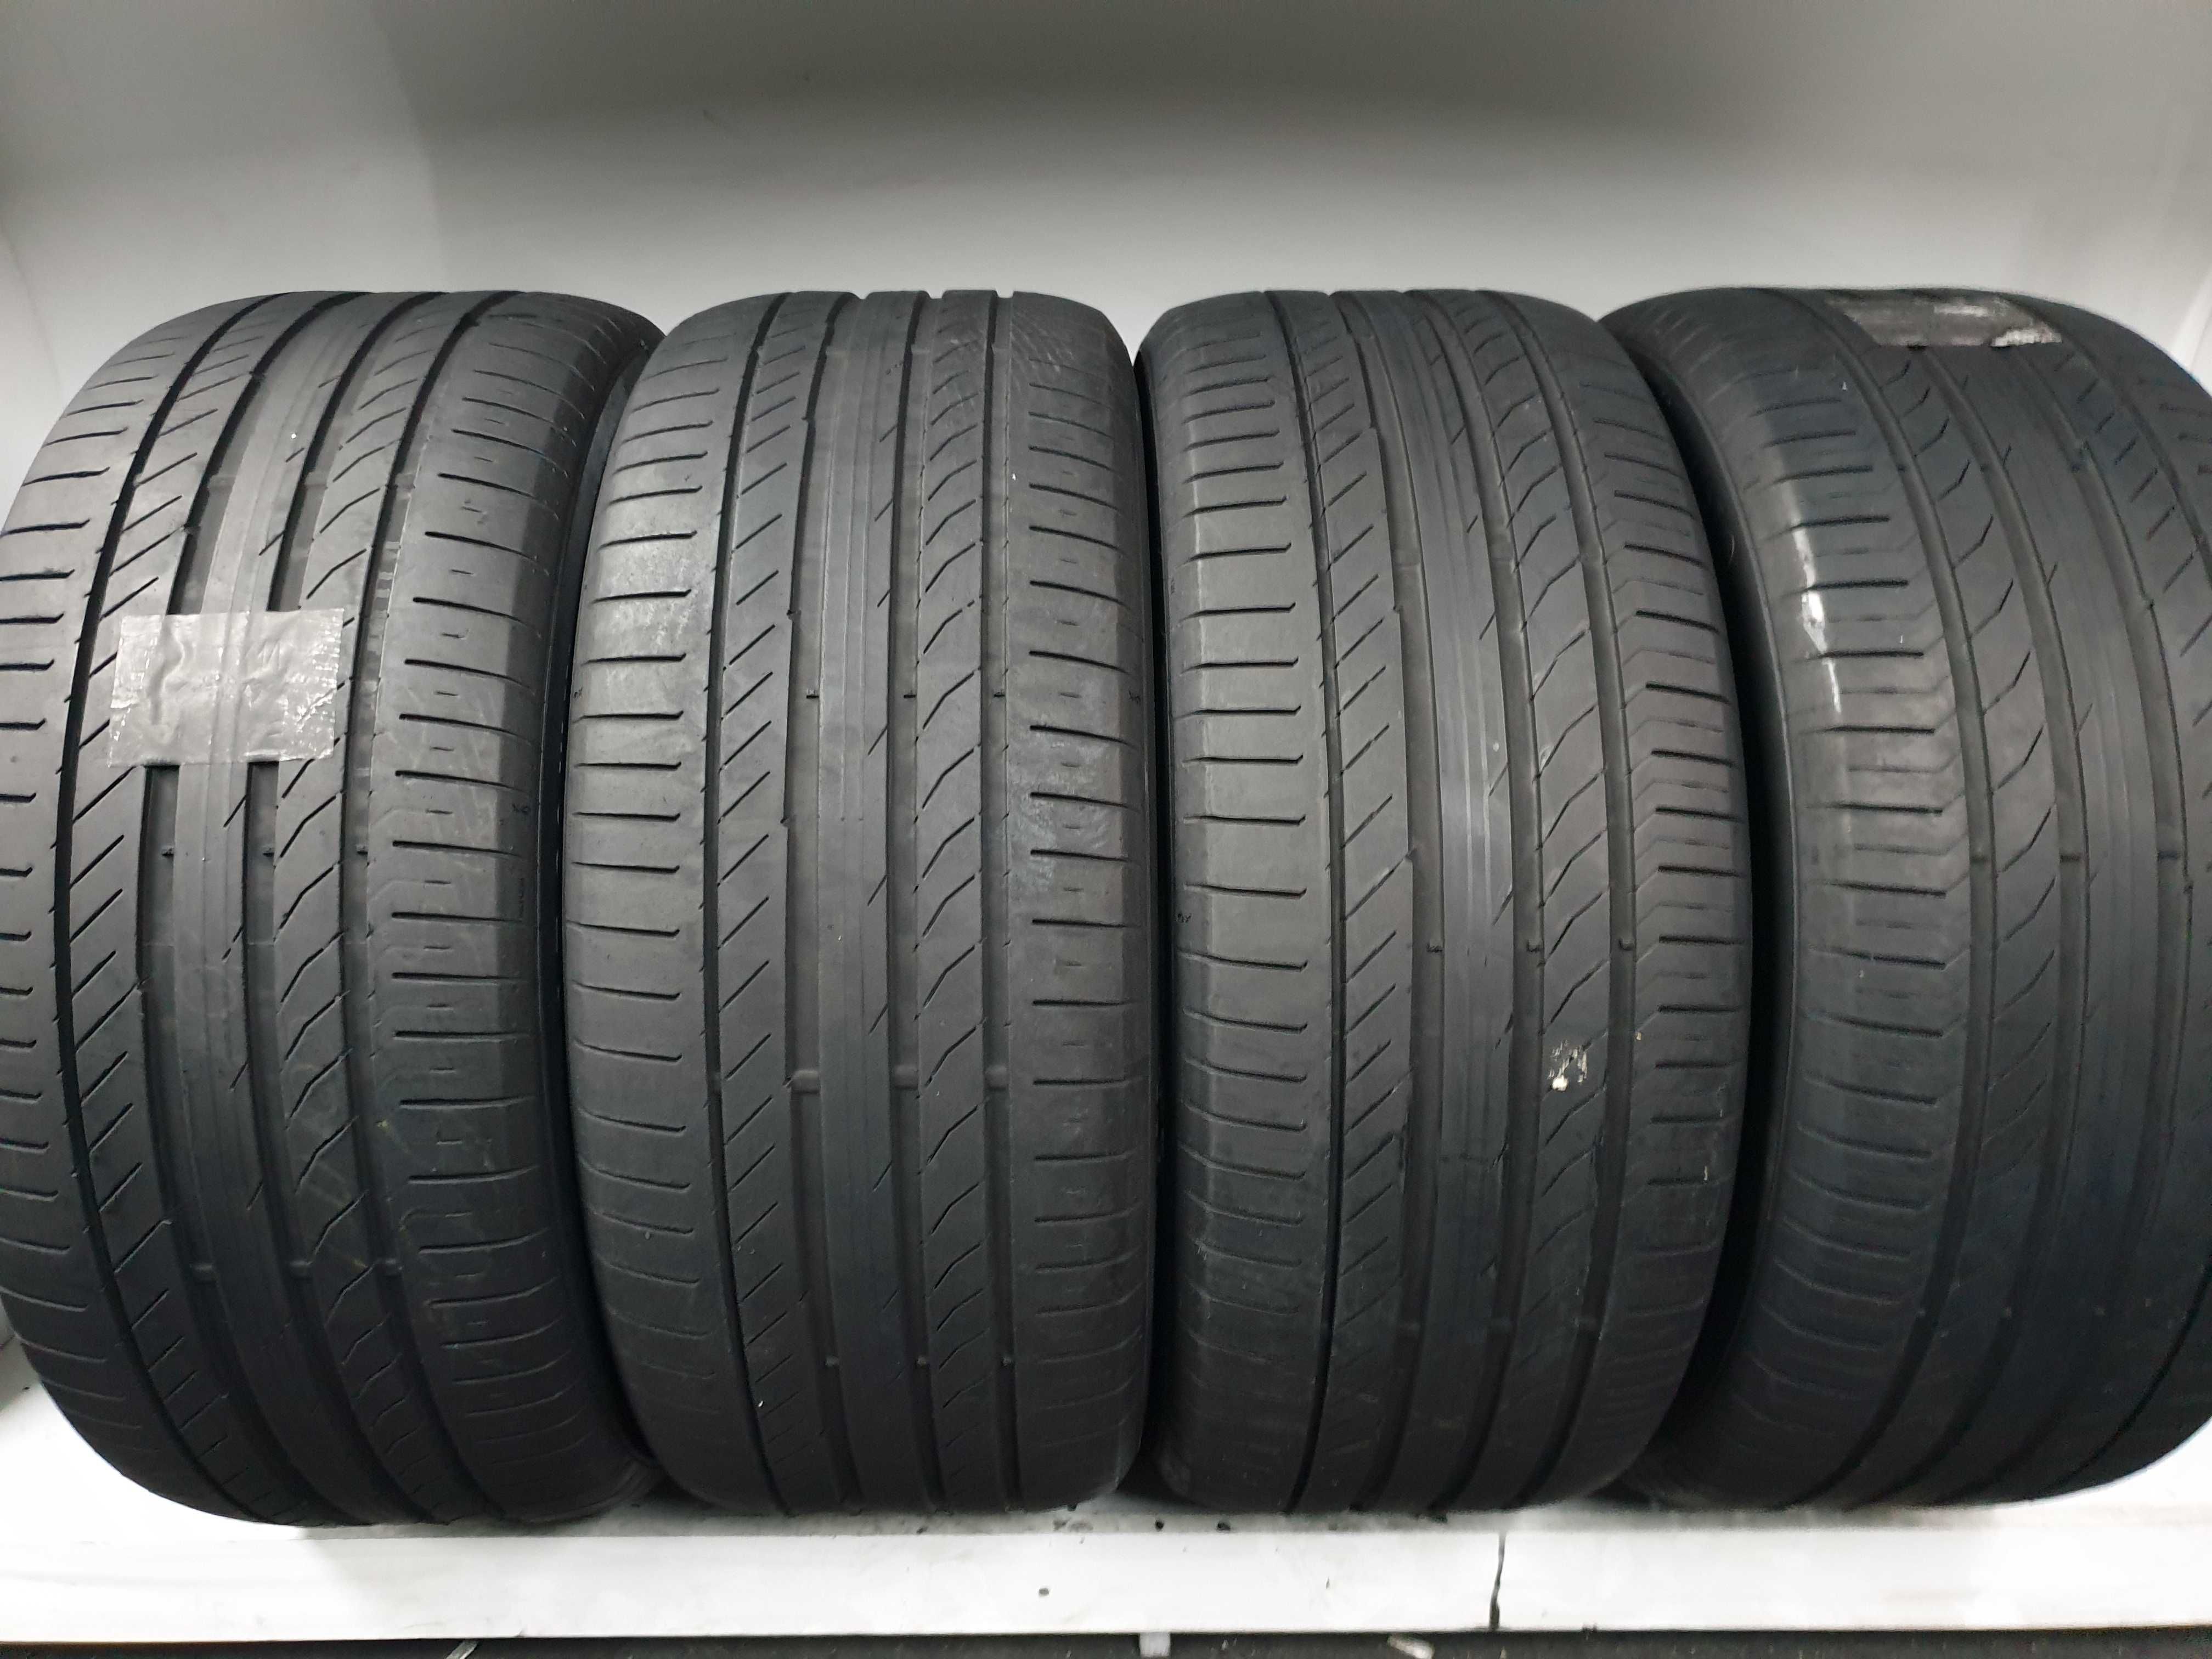 Anvelope Second Hand Continental Vara-275/50 R20 113W,in stoc R19/21